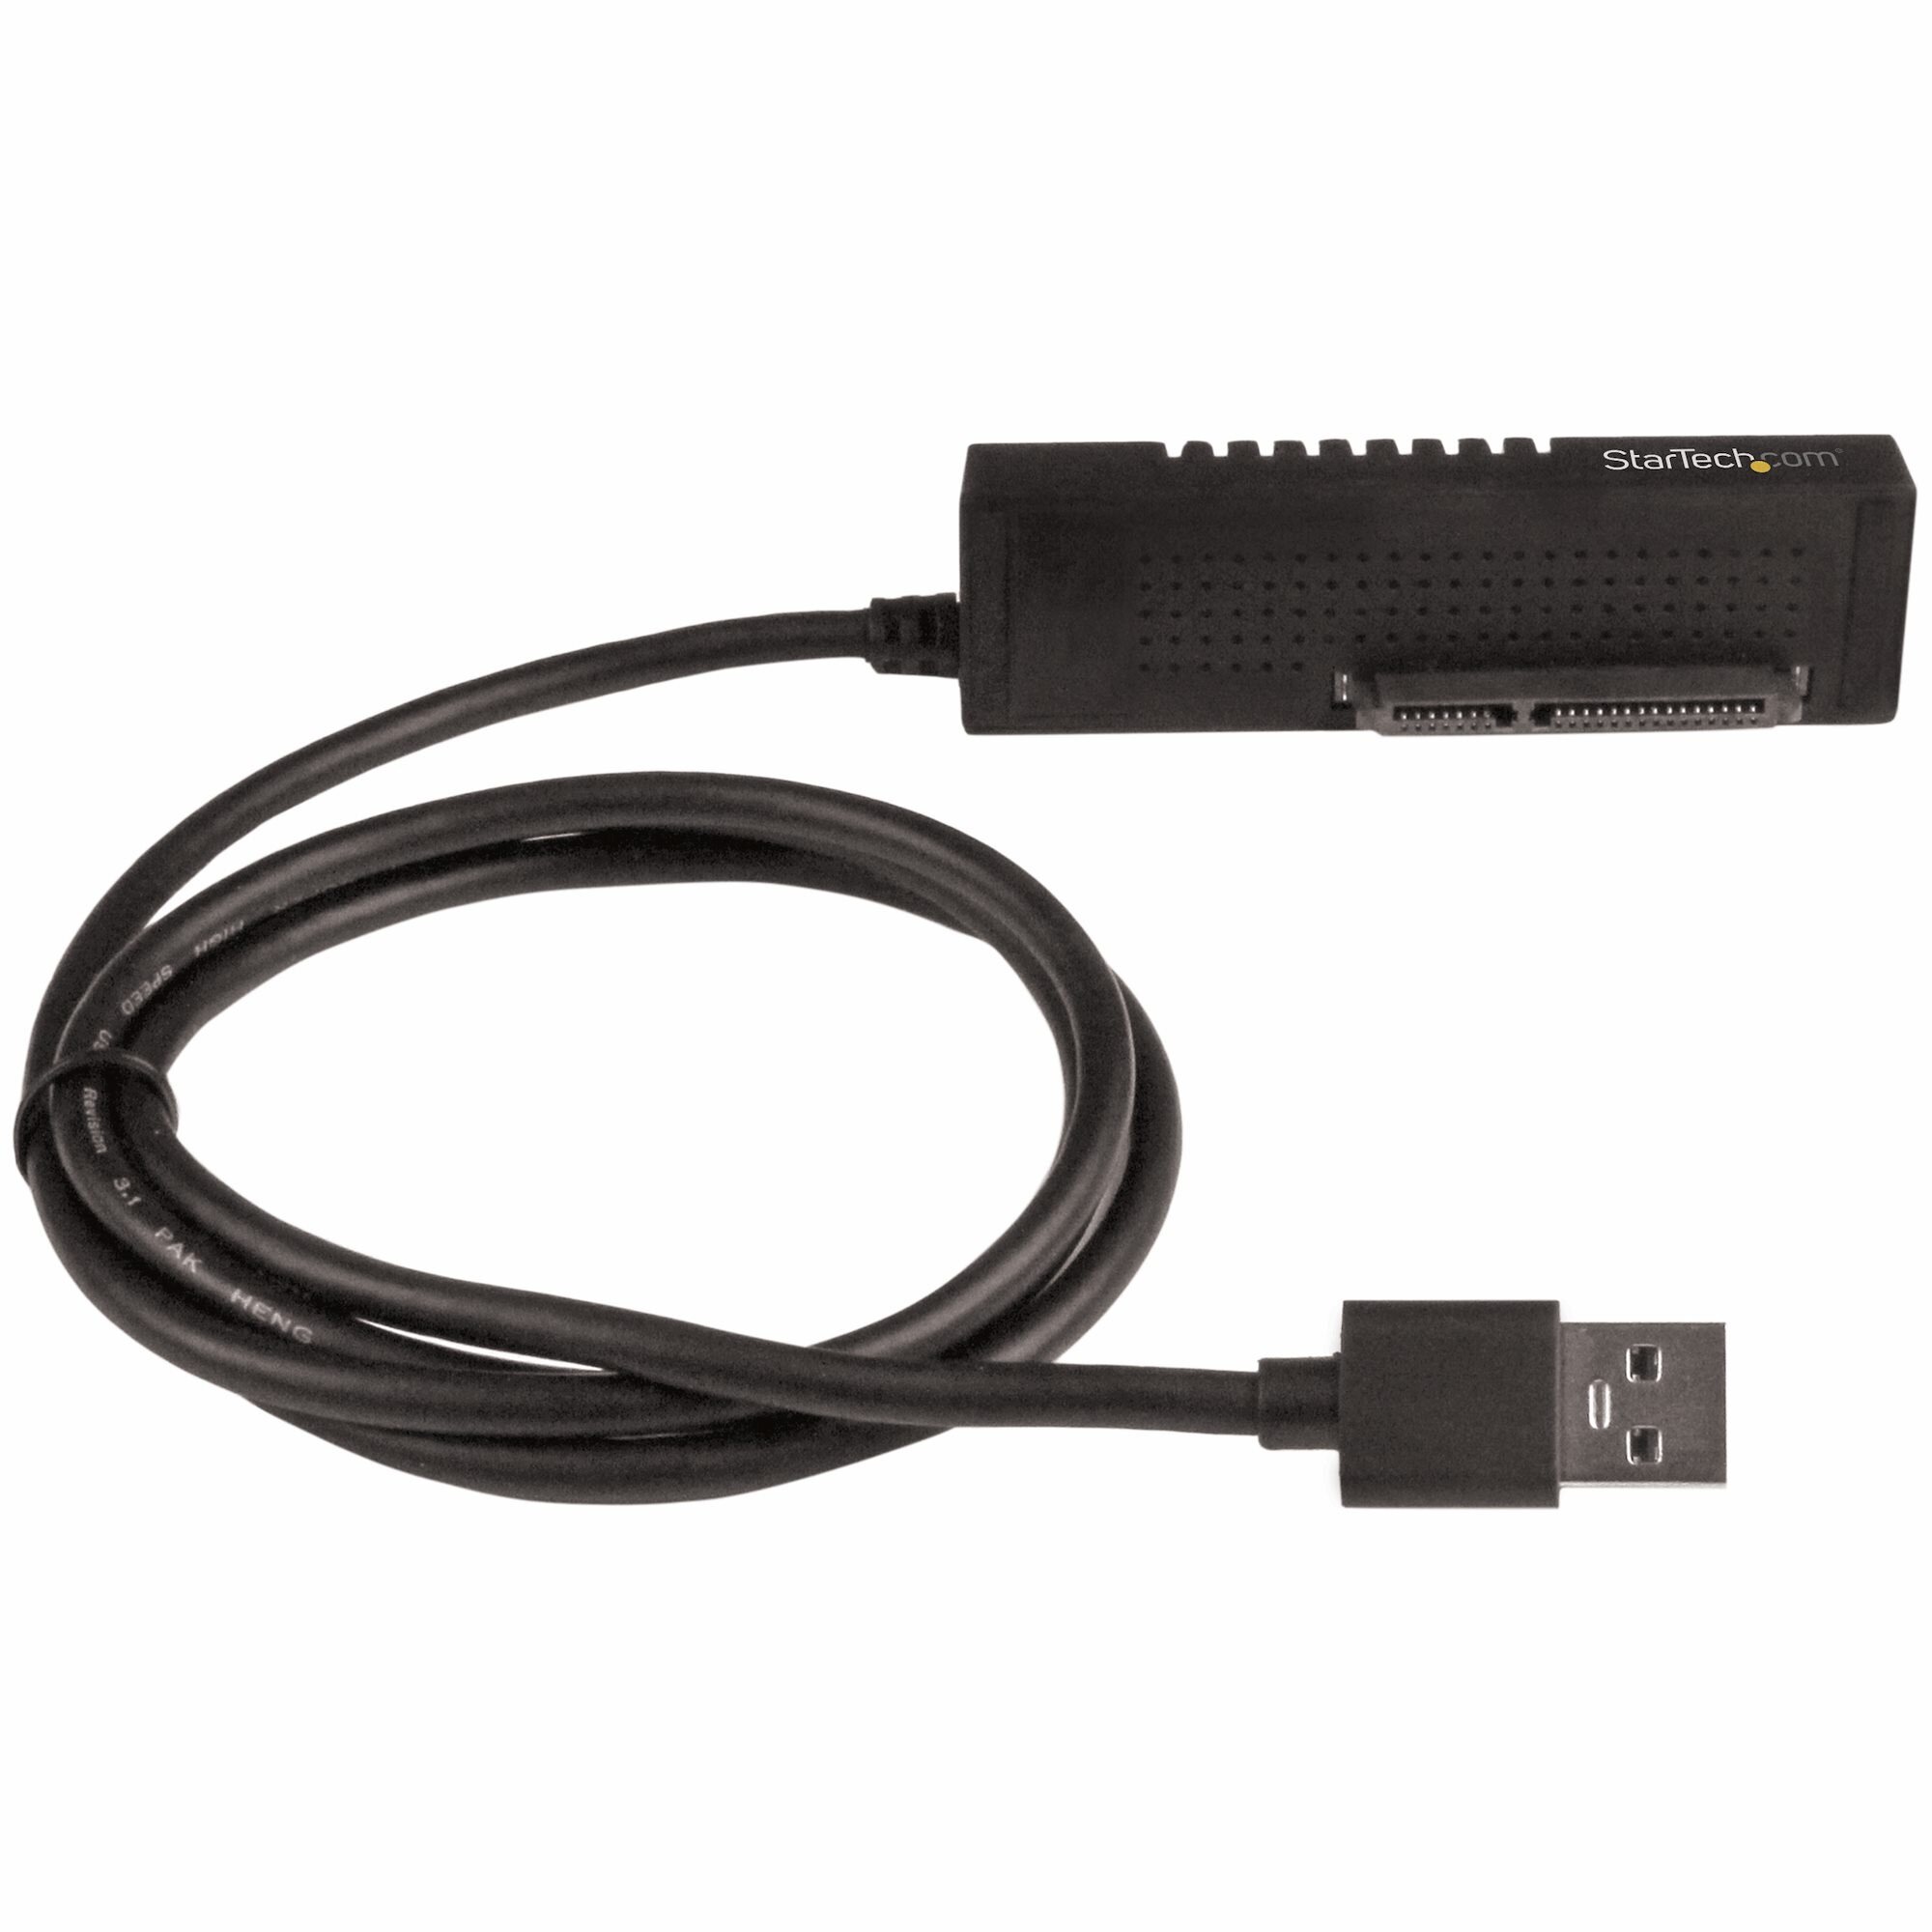 usb to sata adapter best buy